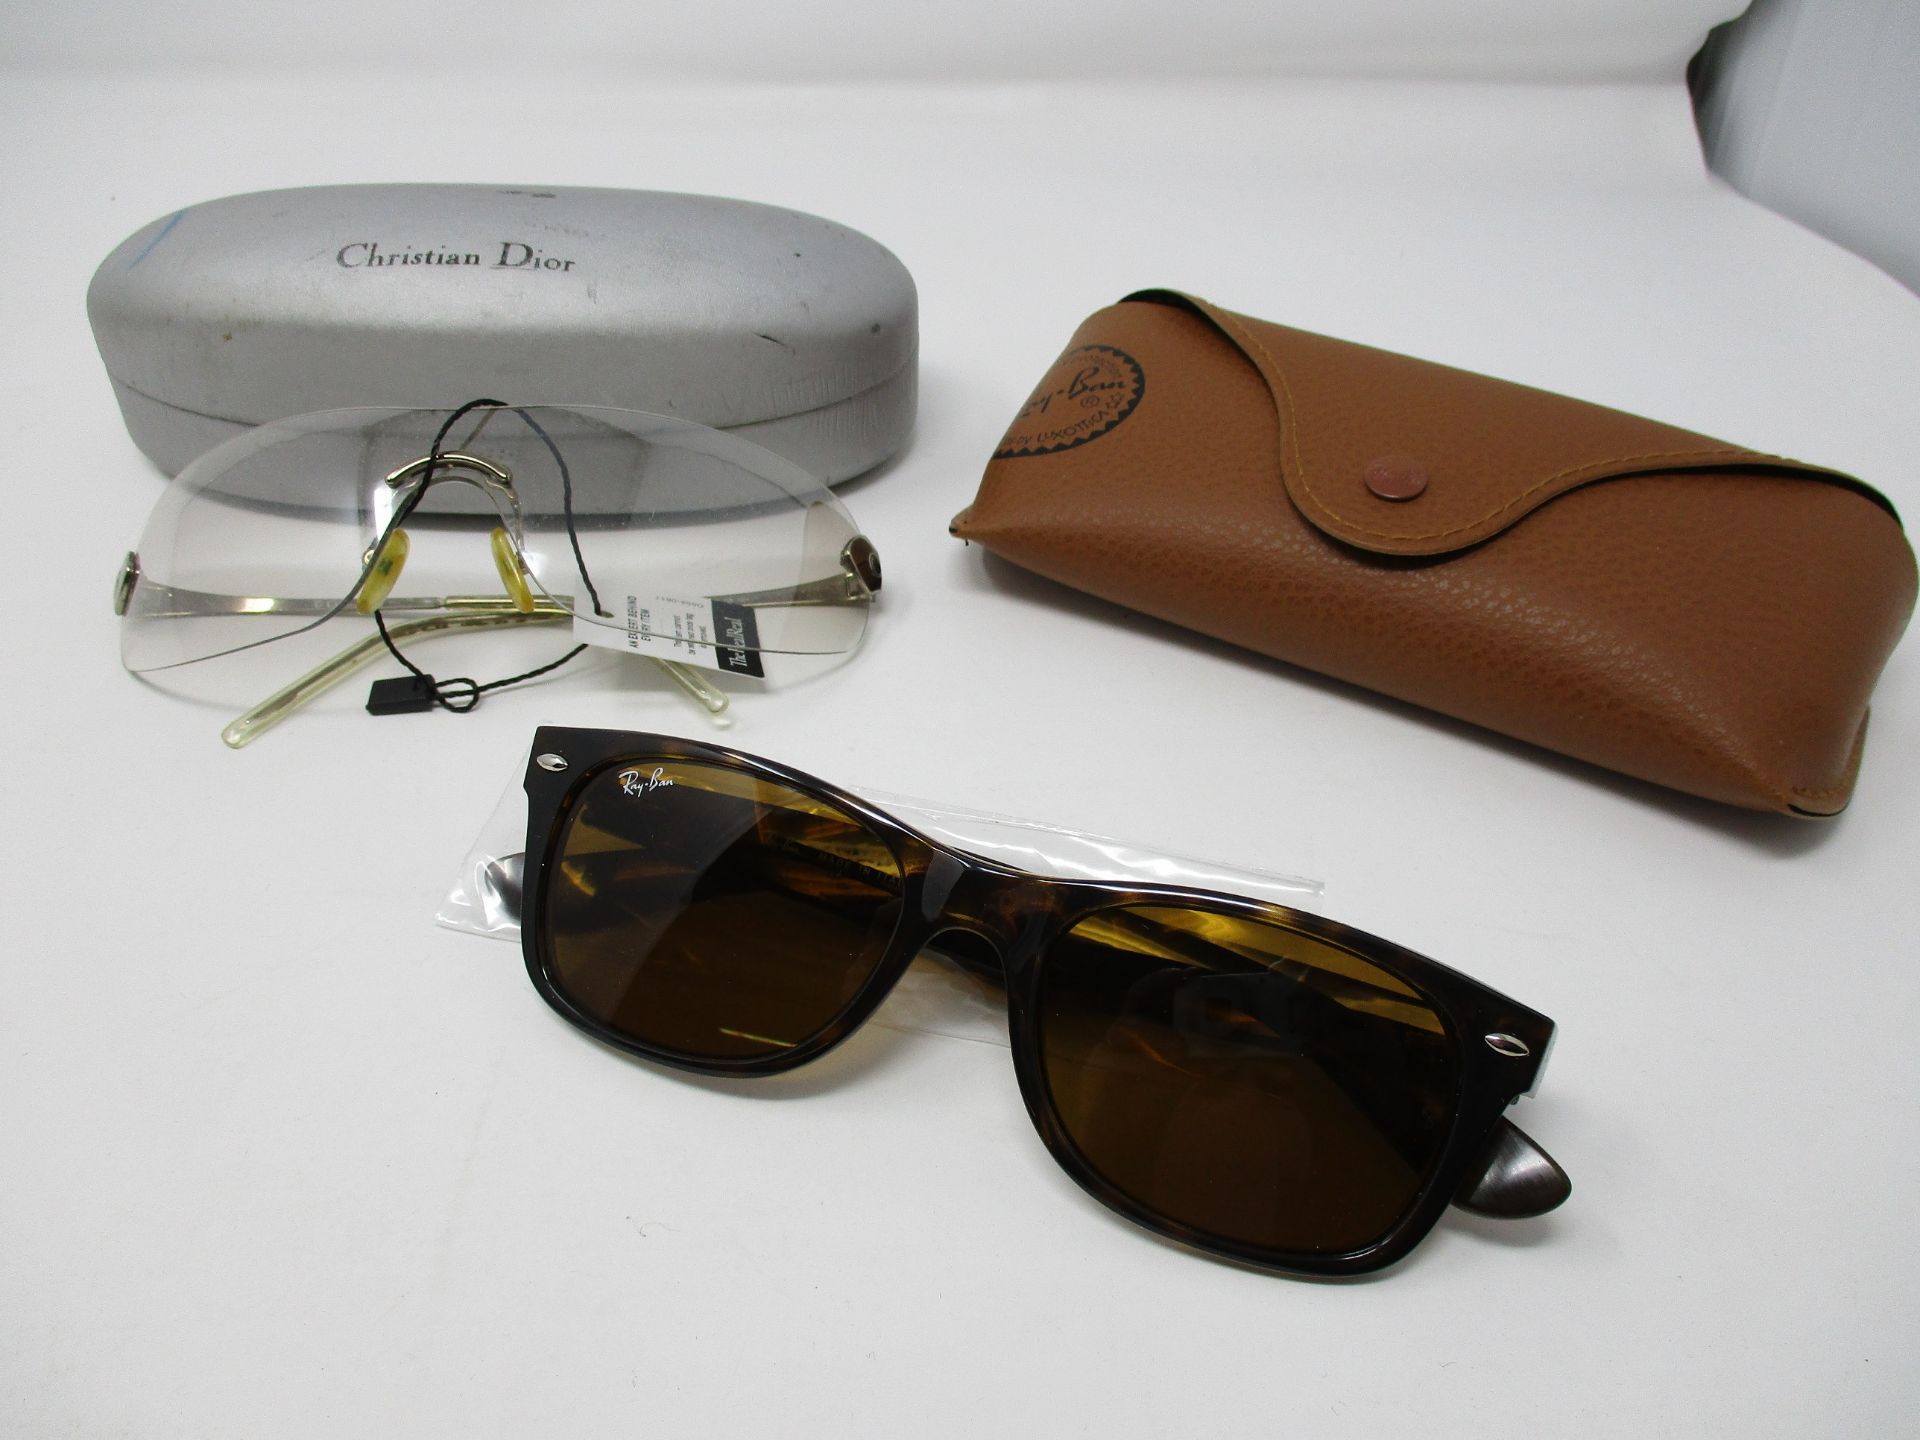 One as new Ray Ban New Wayfarer tortoise prescription sunglasses. One pre-owned Christian Dior clear